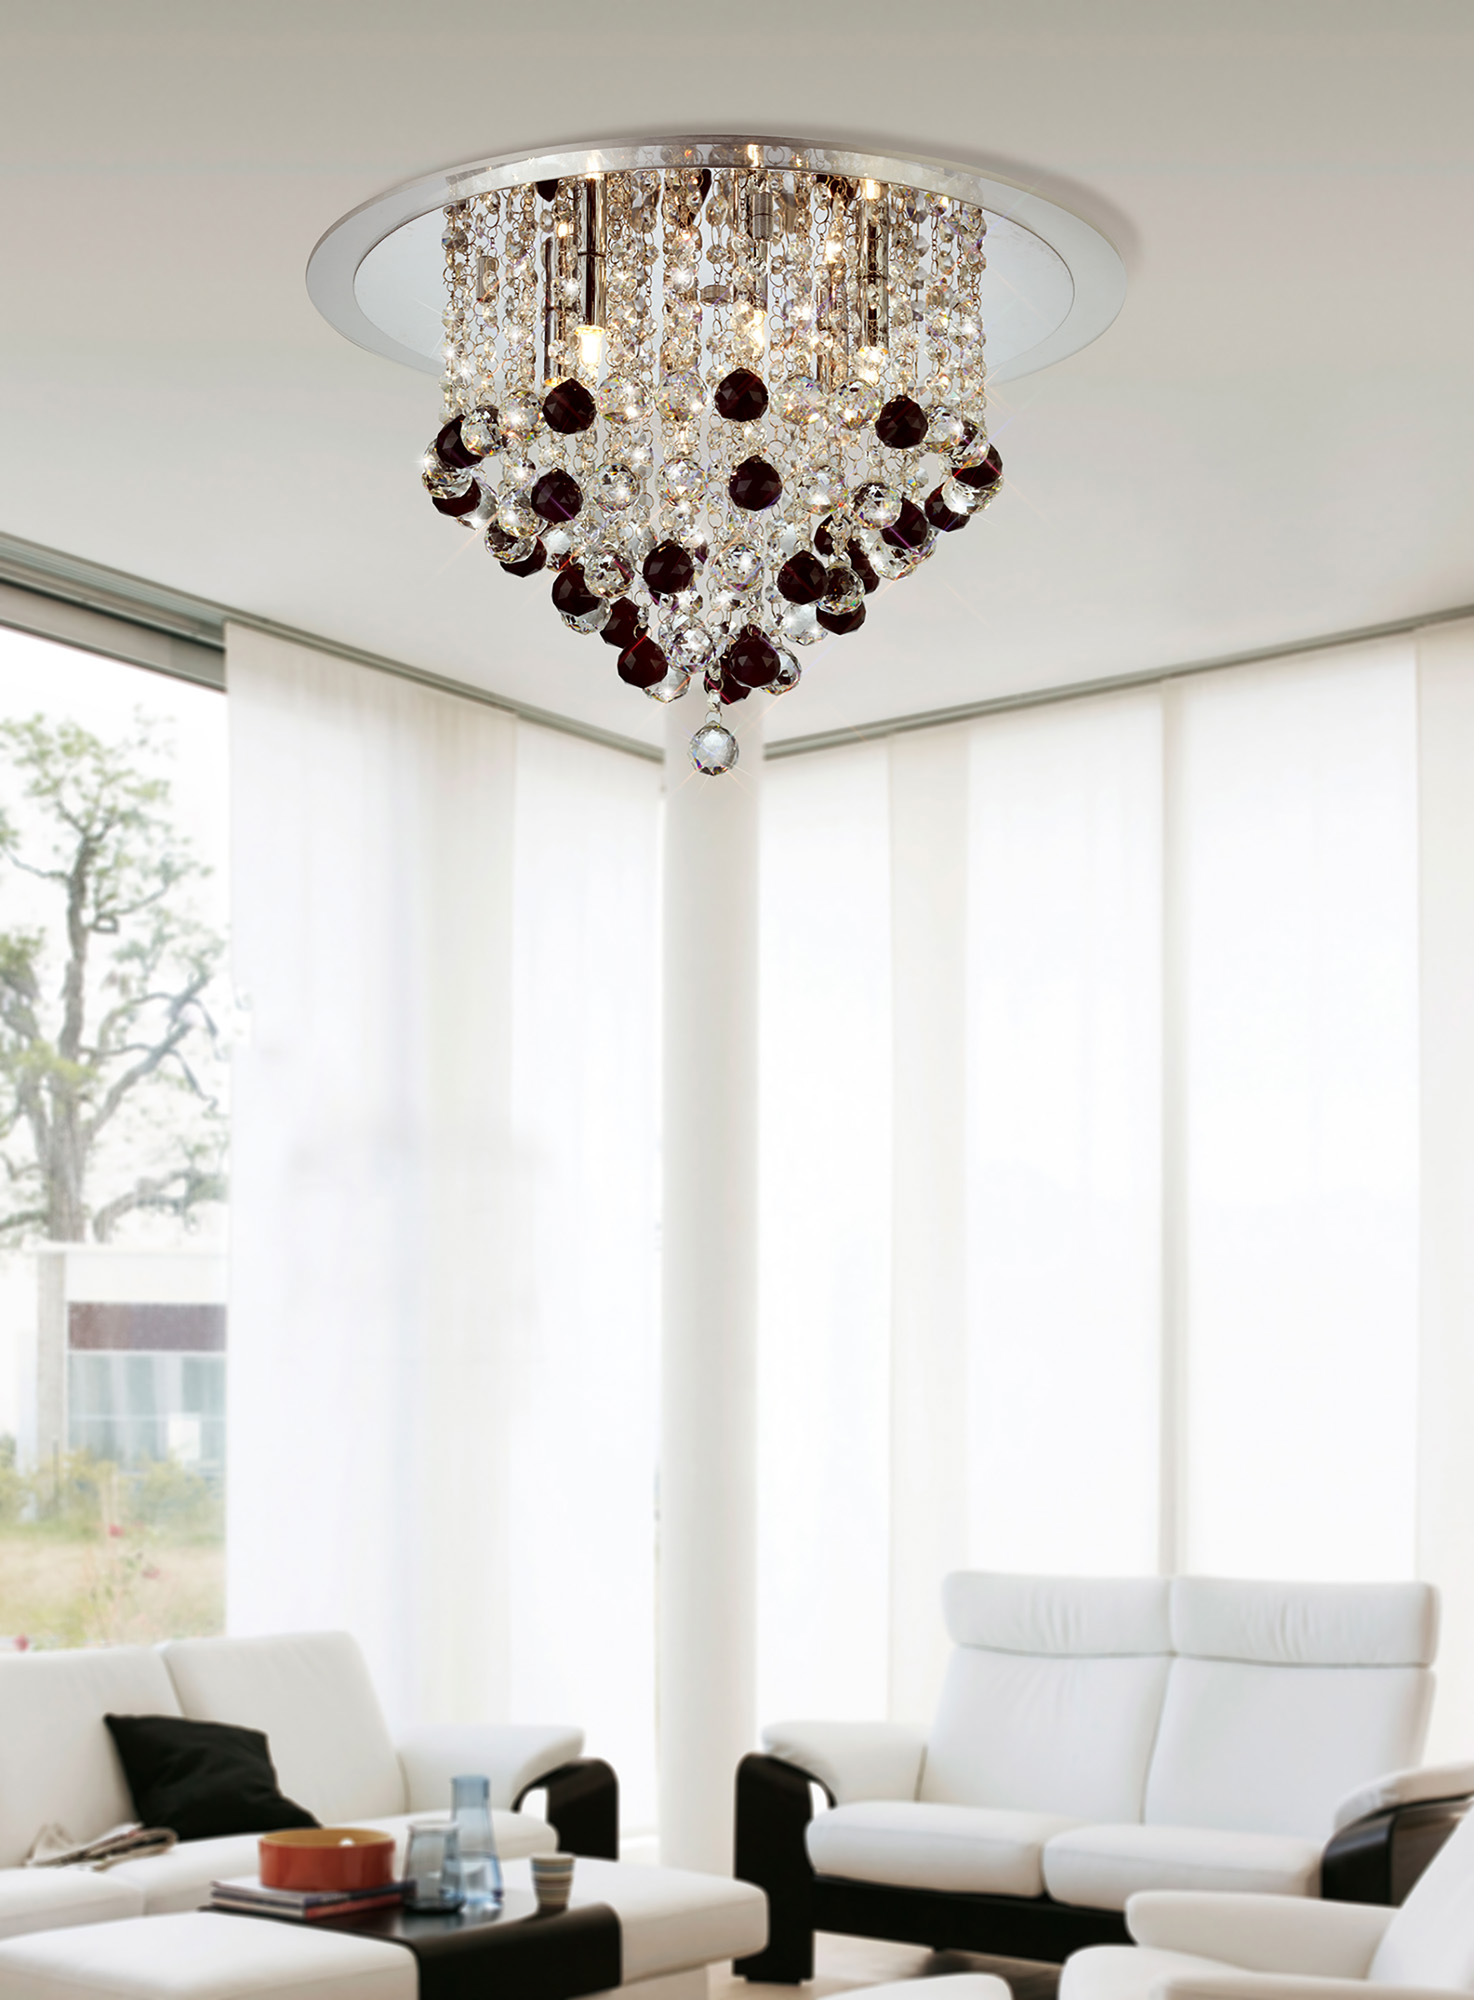 Atla Crystal Table Lamps Diyas Contemporary Crystal Table Lamps